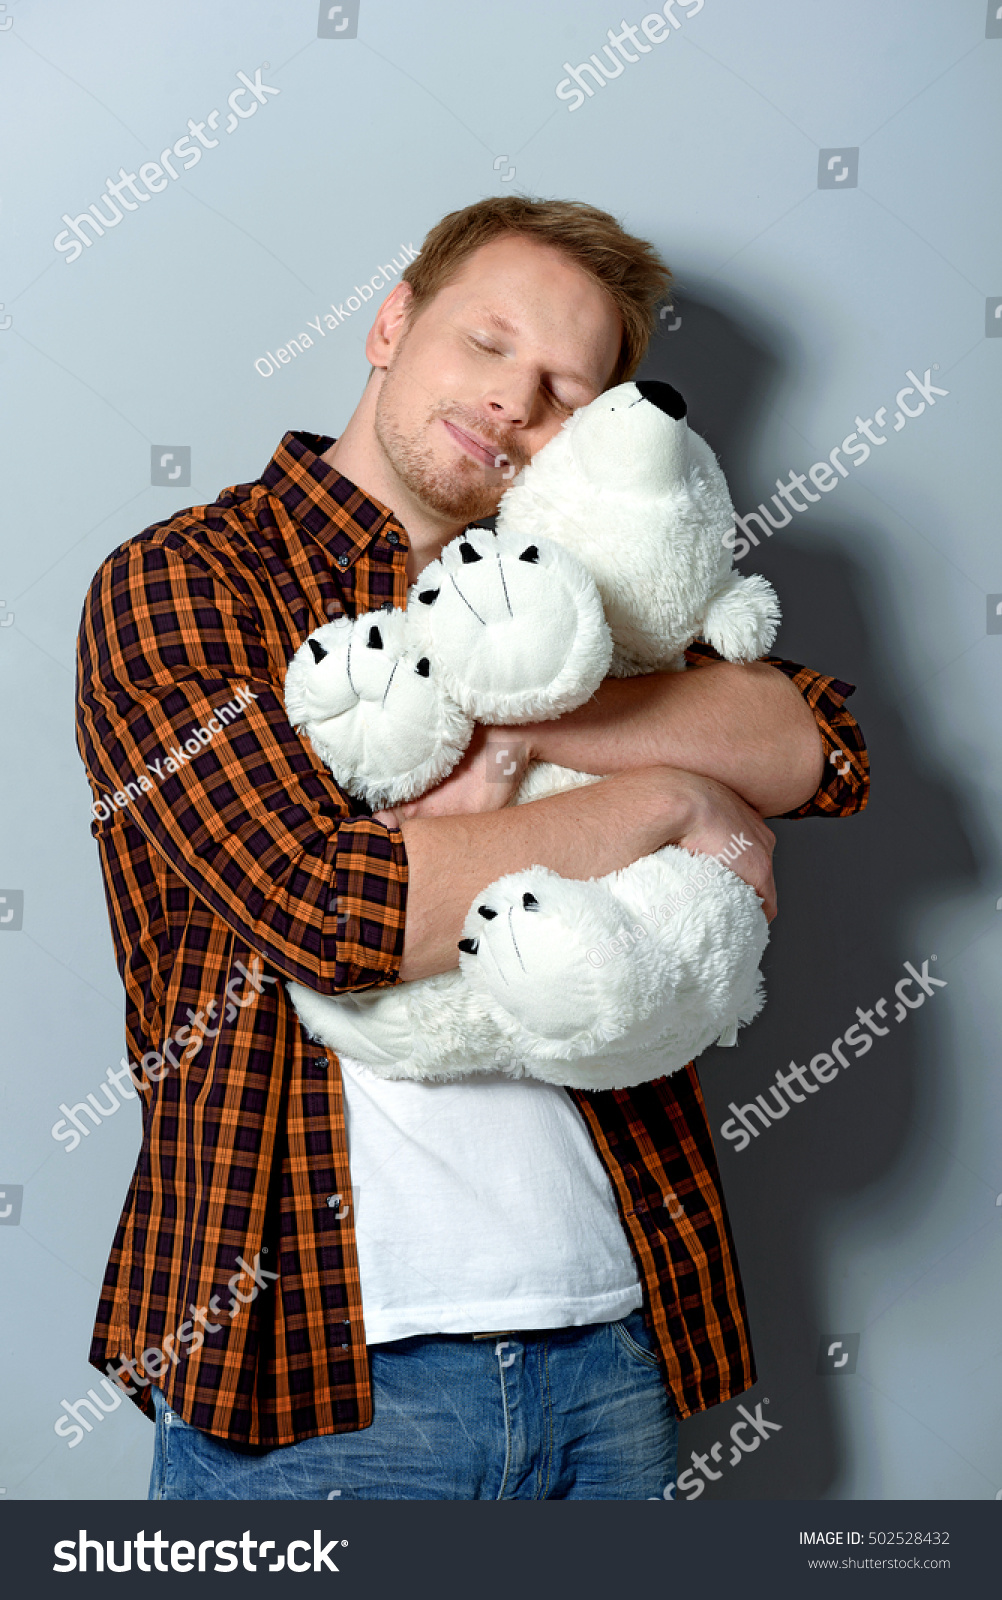 white and soft teddy bear in arms of a man #502528432